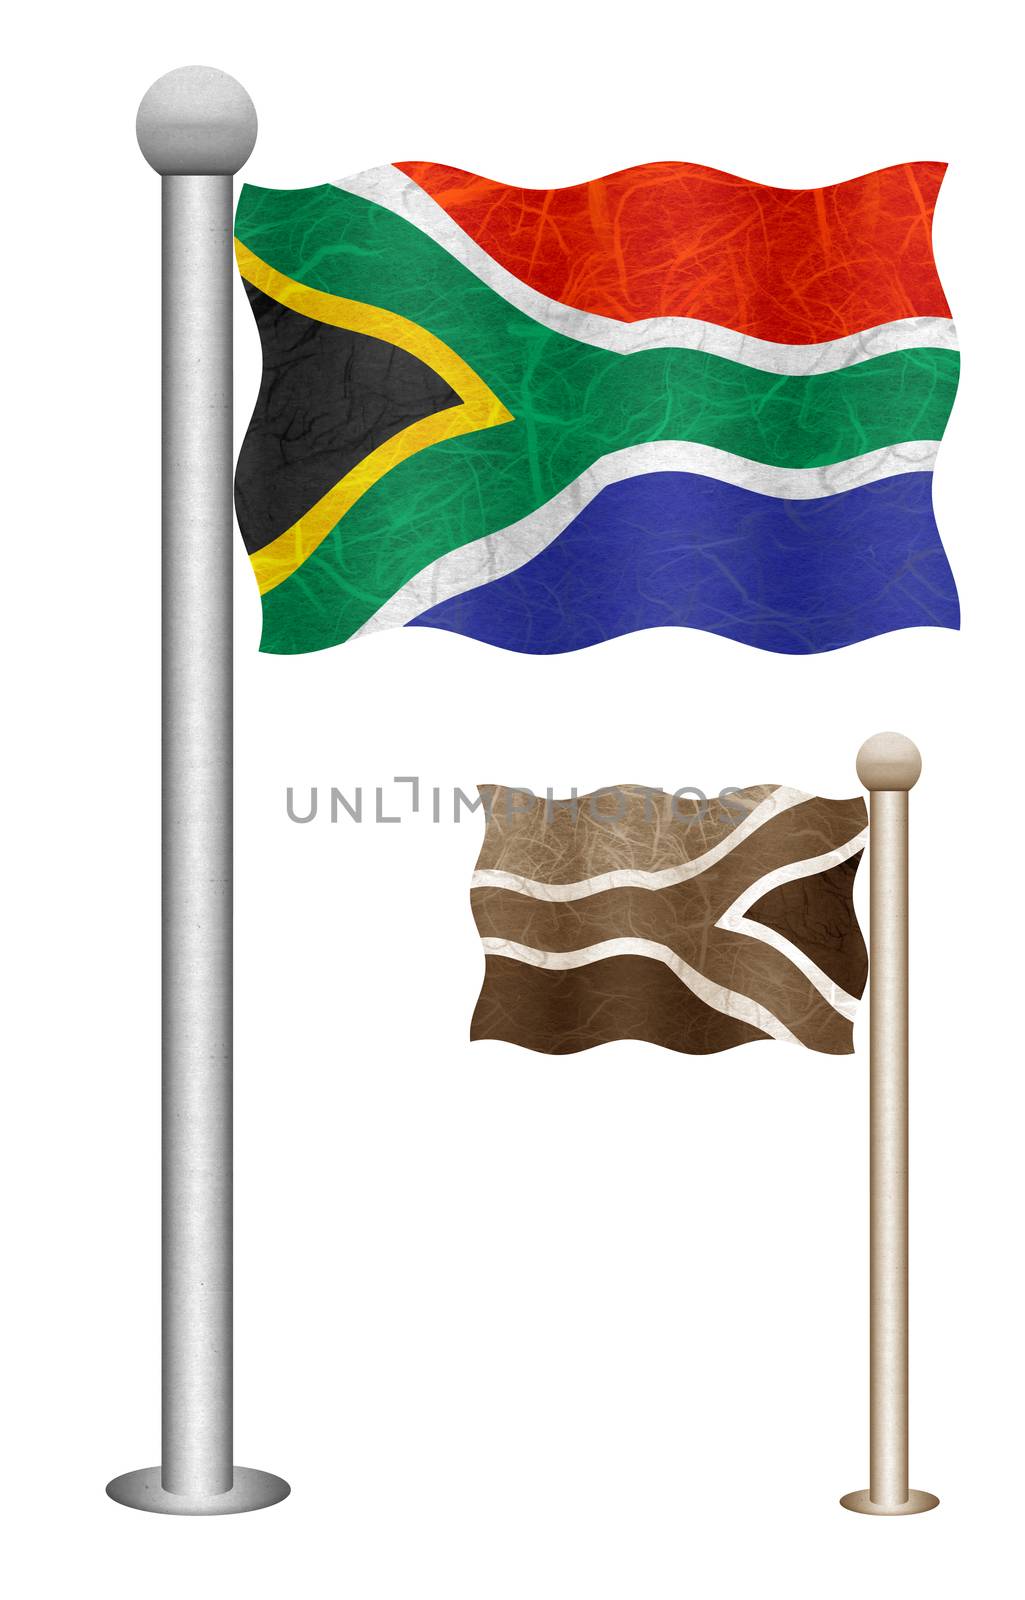 South Africa flag waving on the wind. Flags of countries in Africa. Mulberry paper on white background.